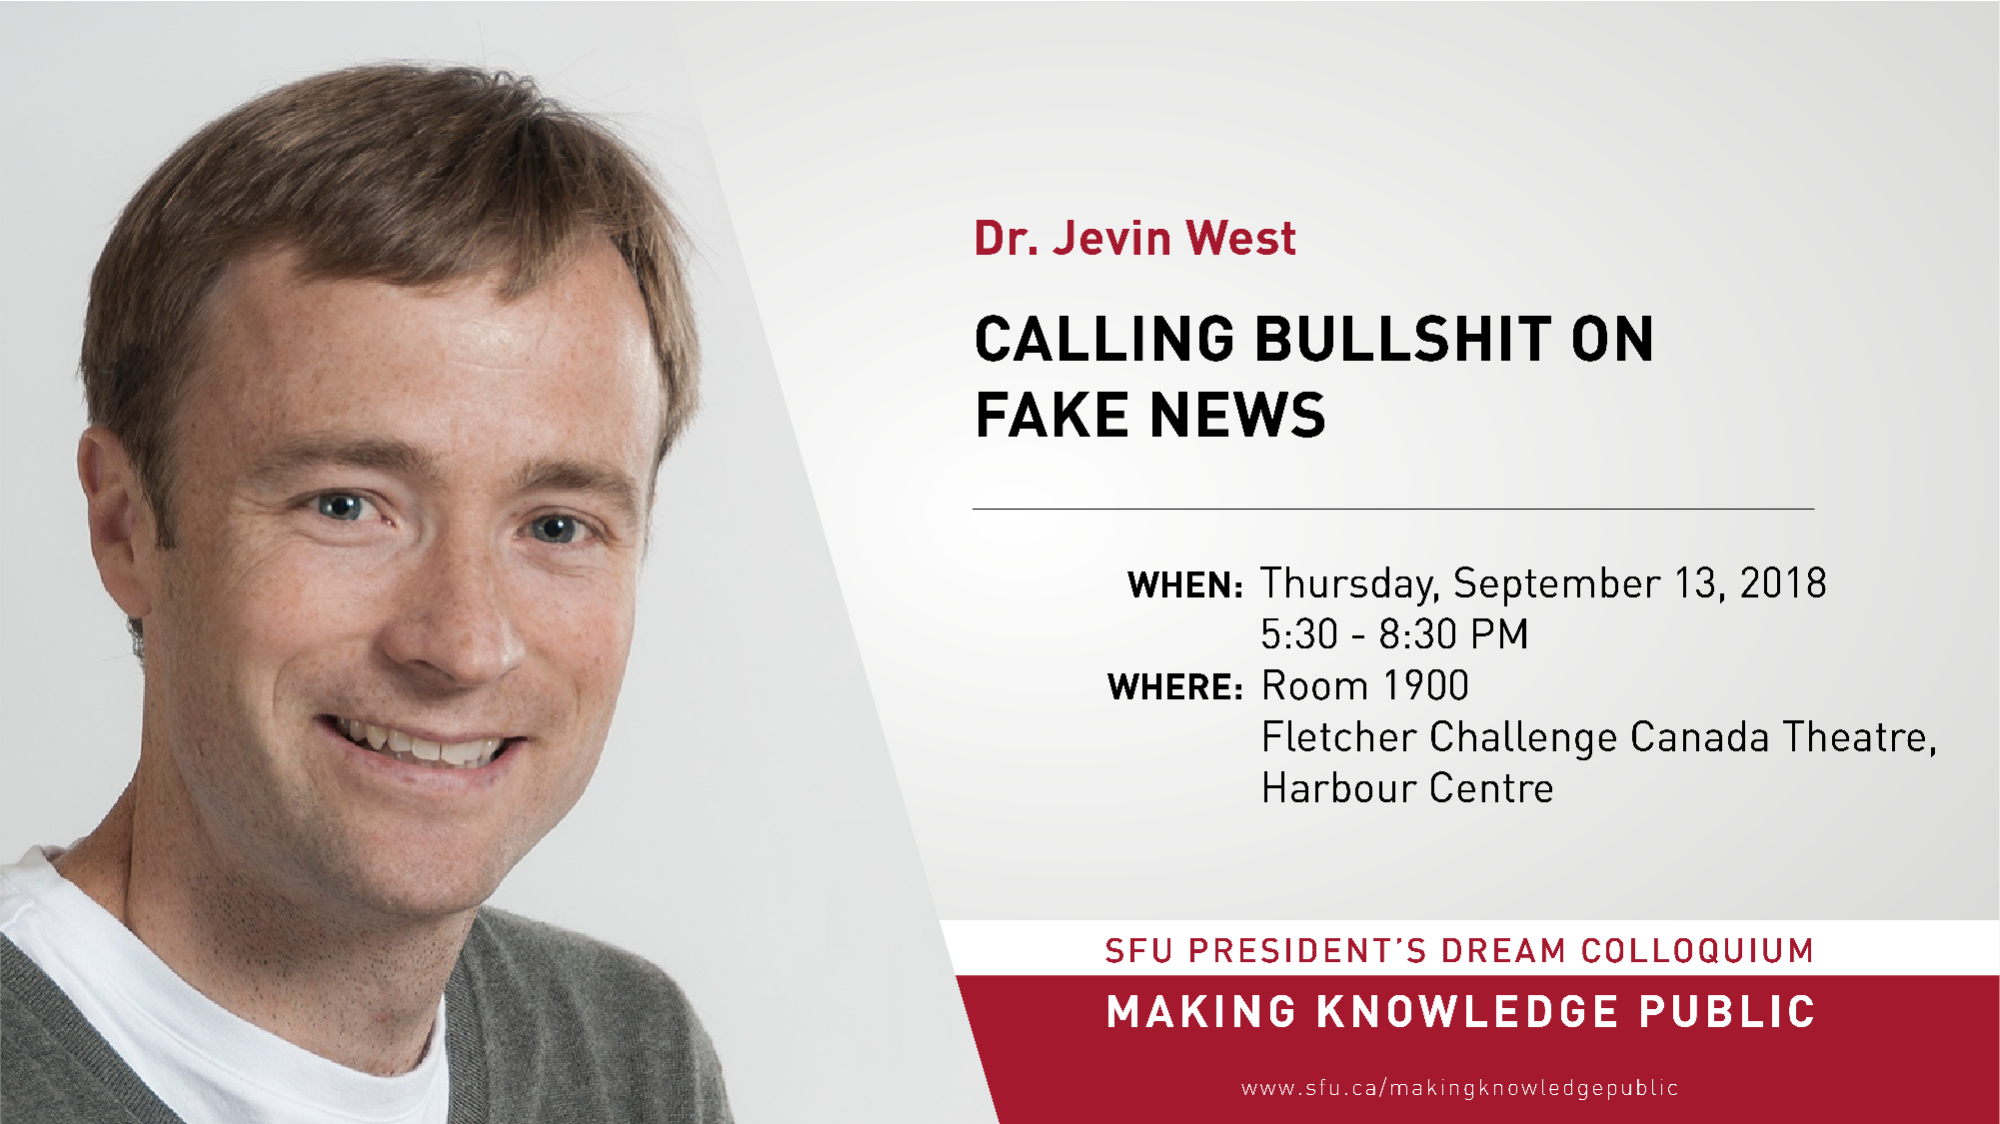 Banner image including a headshot of speaker Jevin West and the event title, date and location.